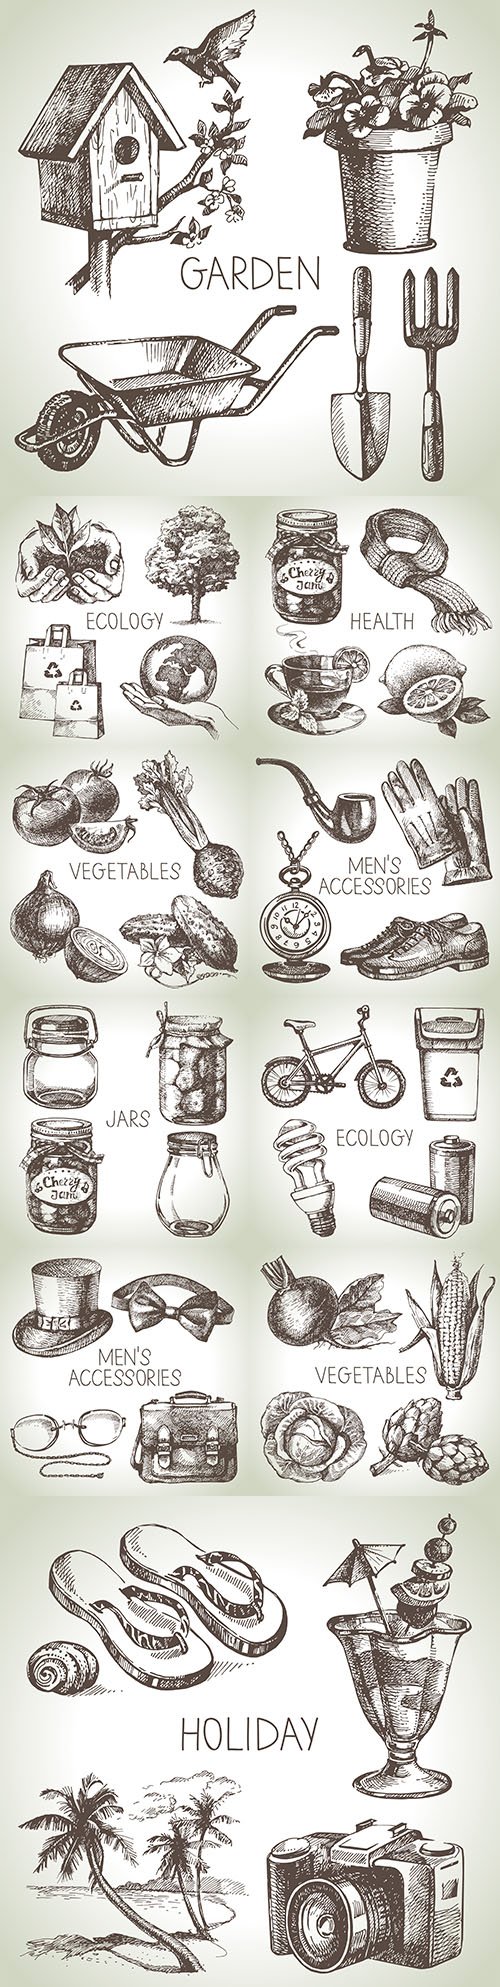 Sketch various accessories and objects design illustration